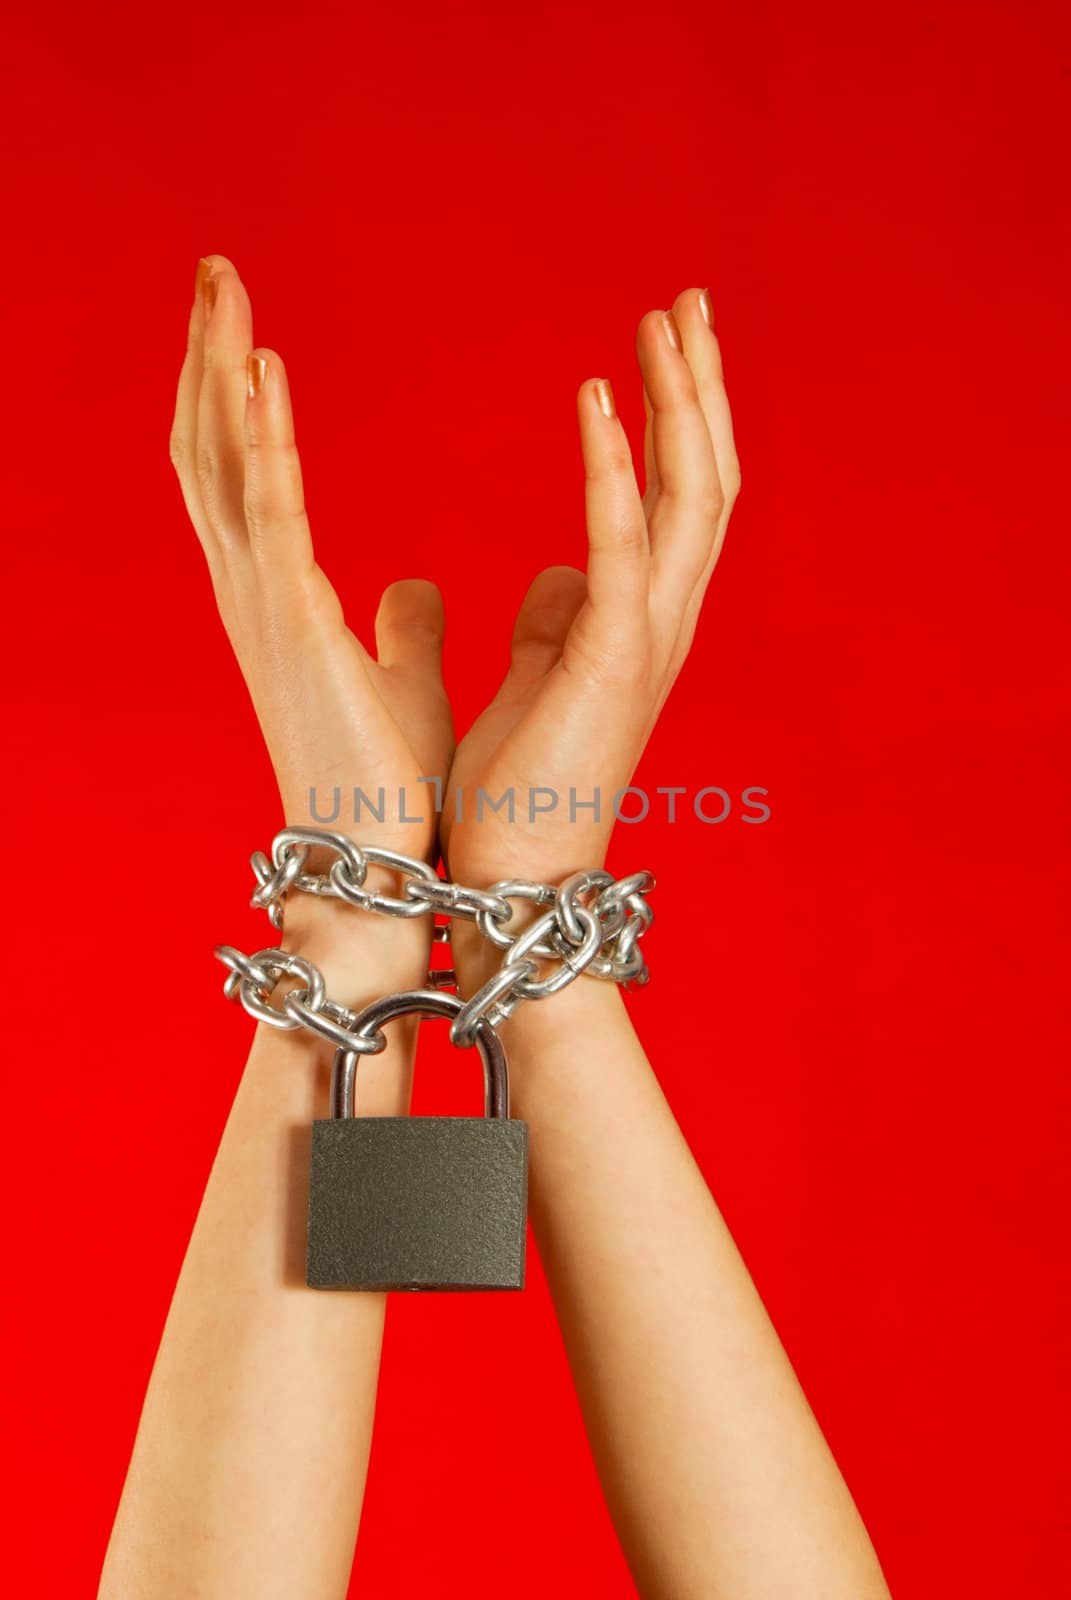 Hands tied up with chains against red background